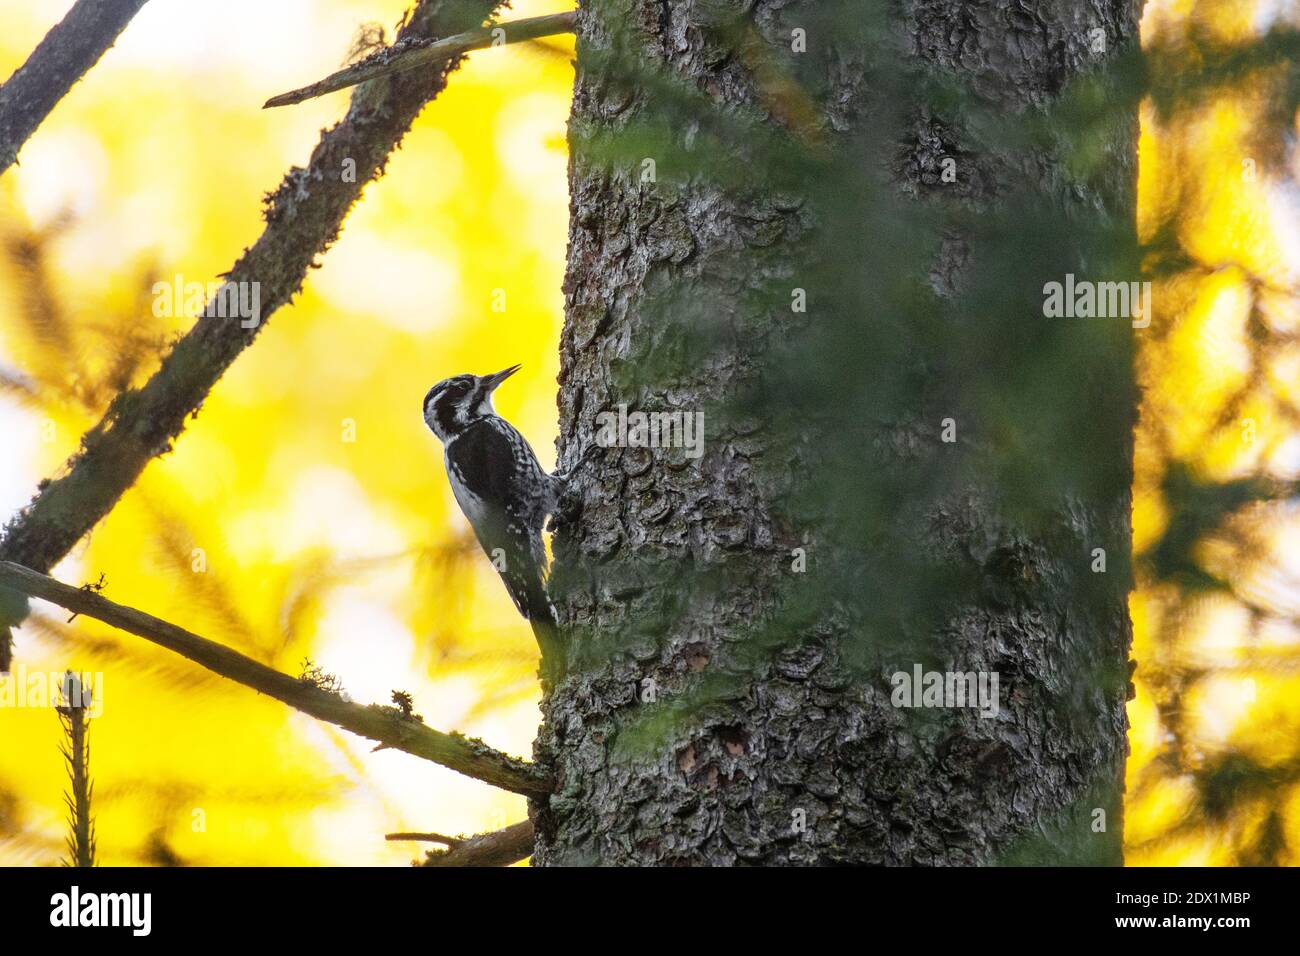 European woodland bird Three-toed woodpecker, Picoides tridactylus on a spruce trunk in an old-growth forest in Estonia. Stock Photo